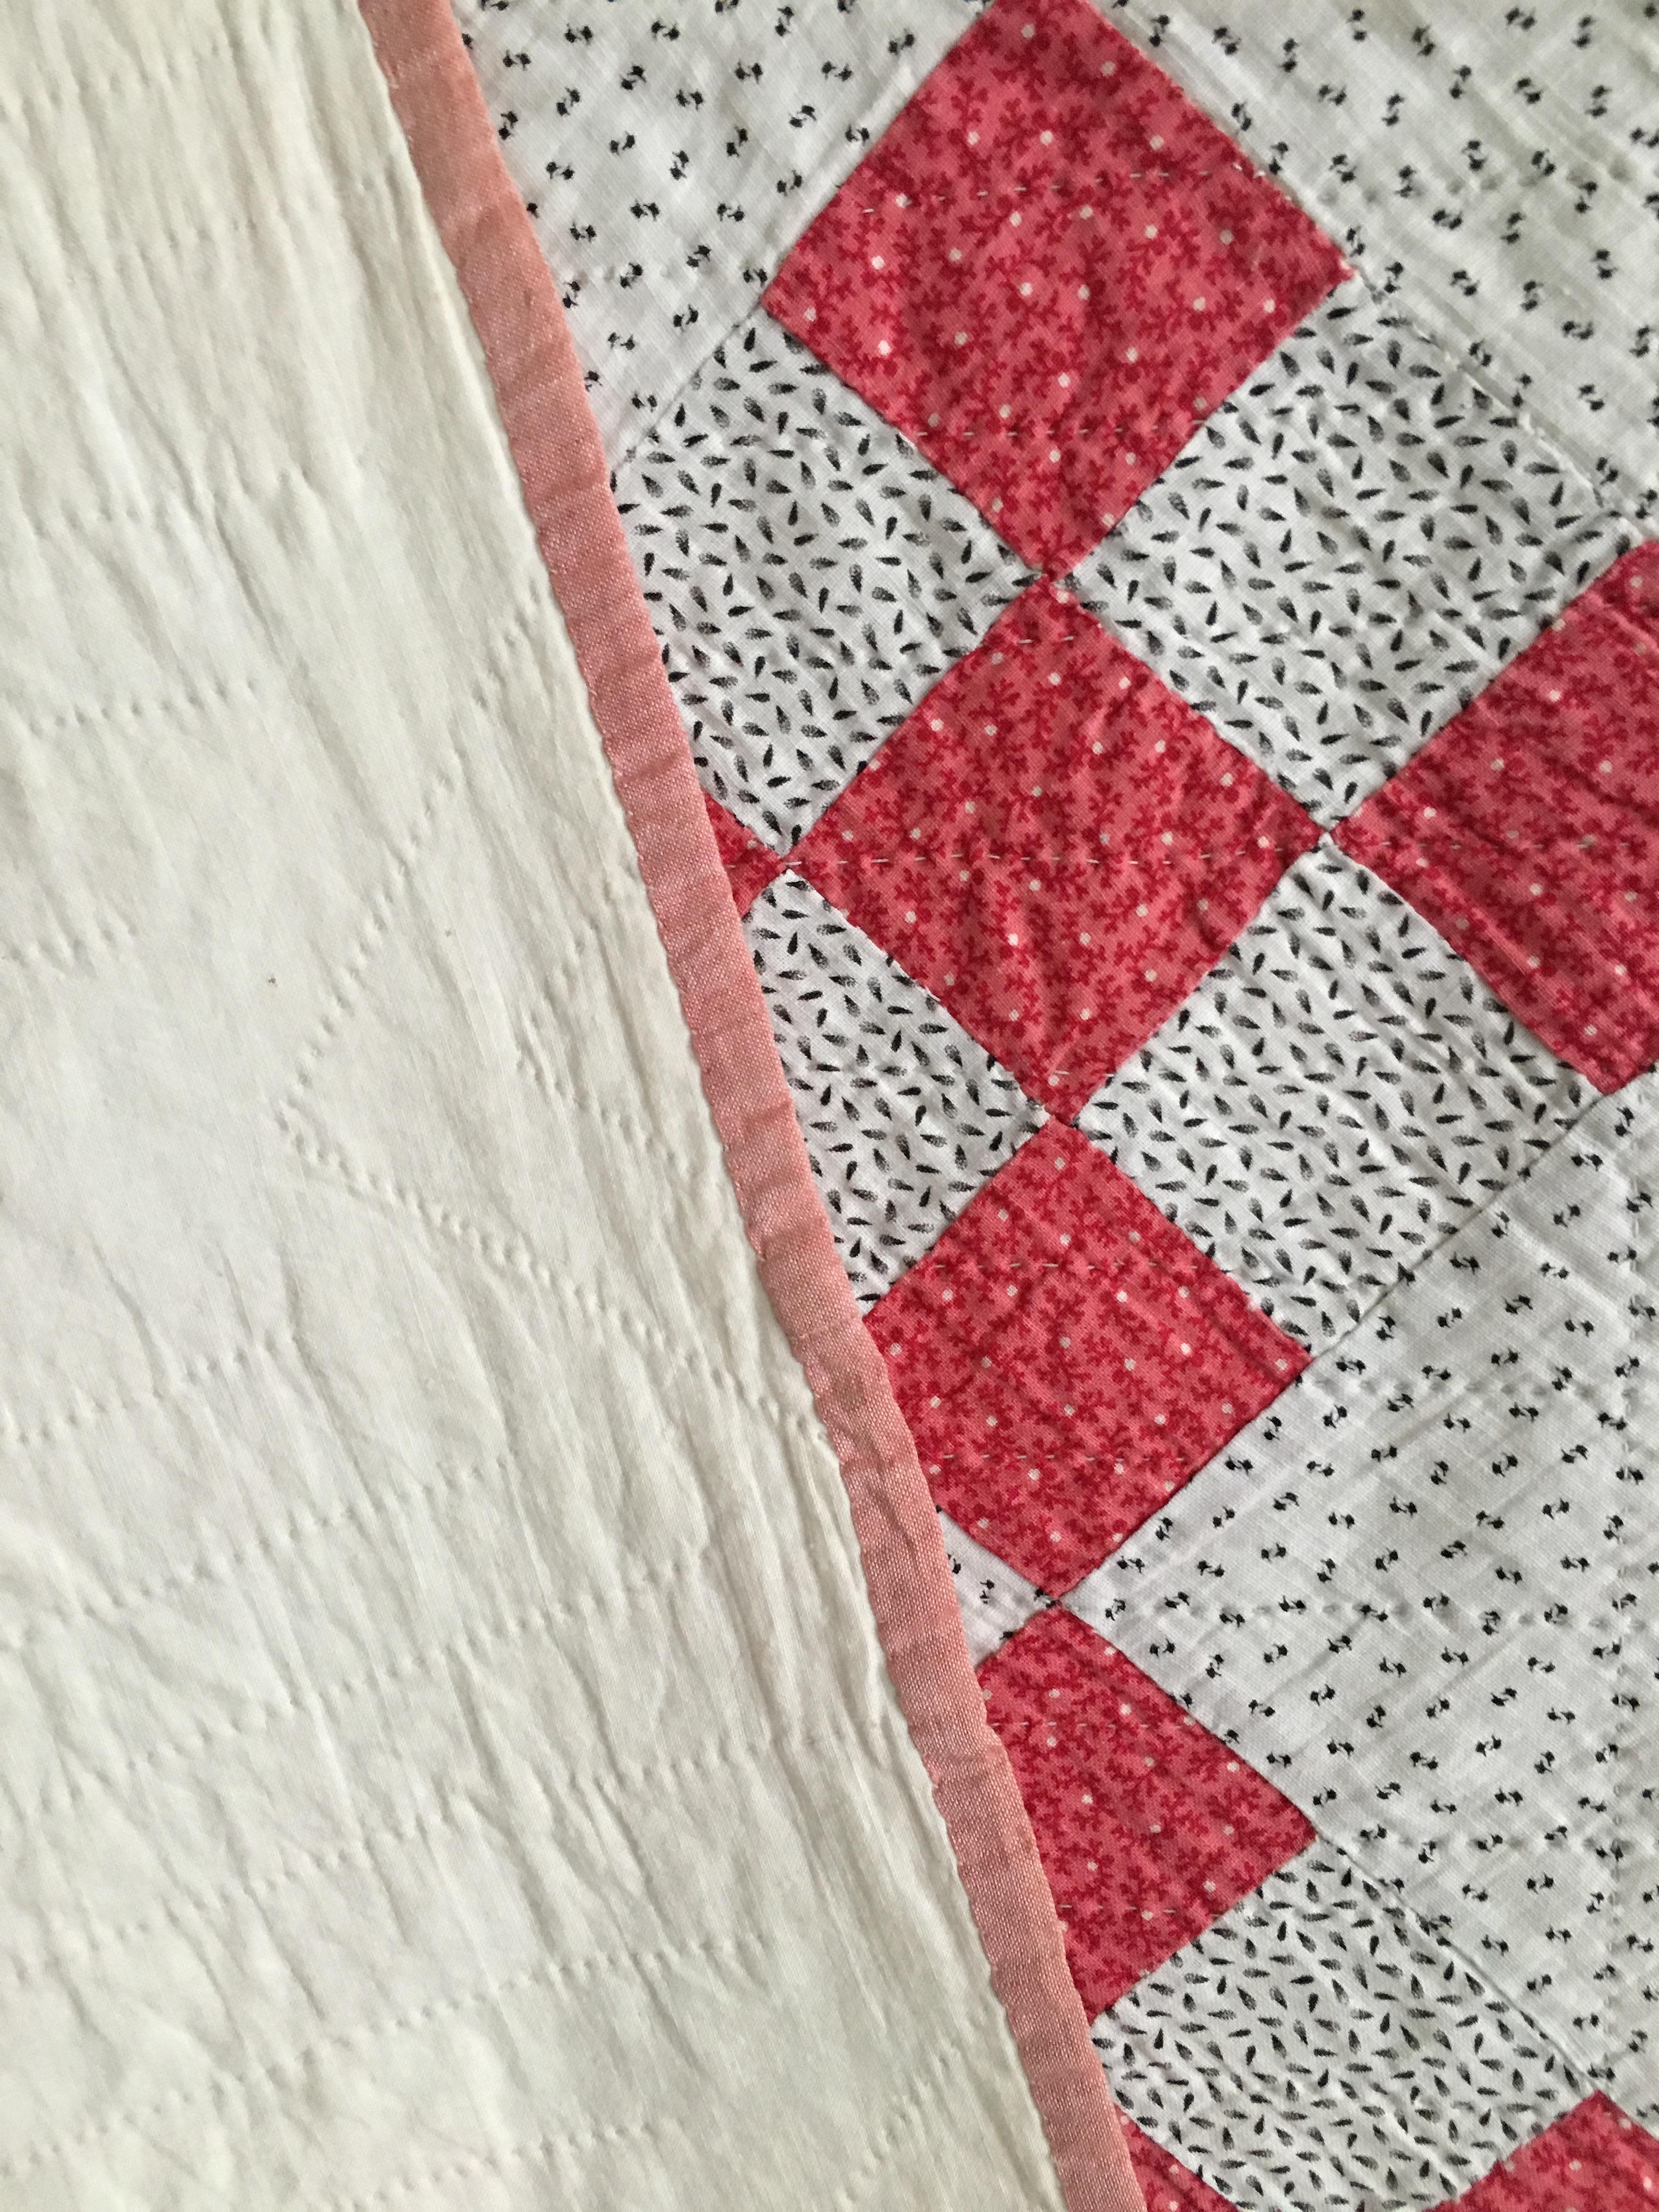 red and white patterns